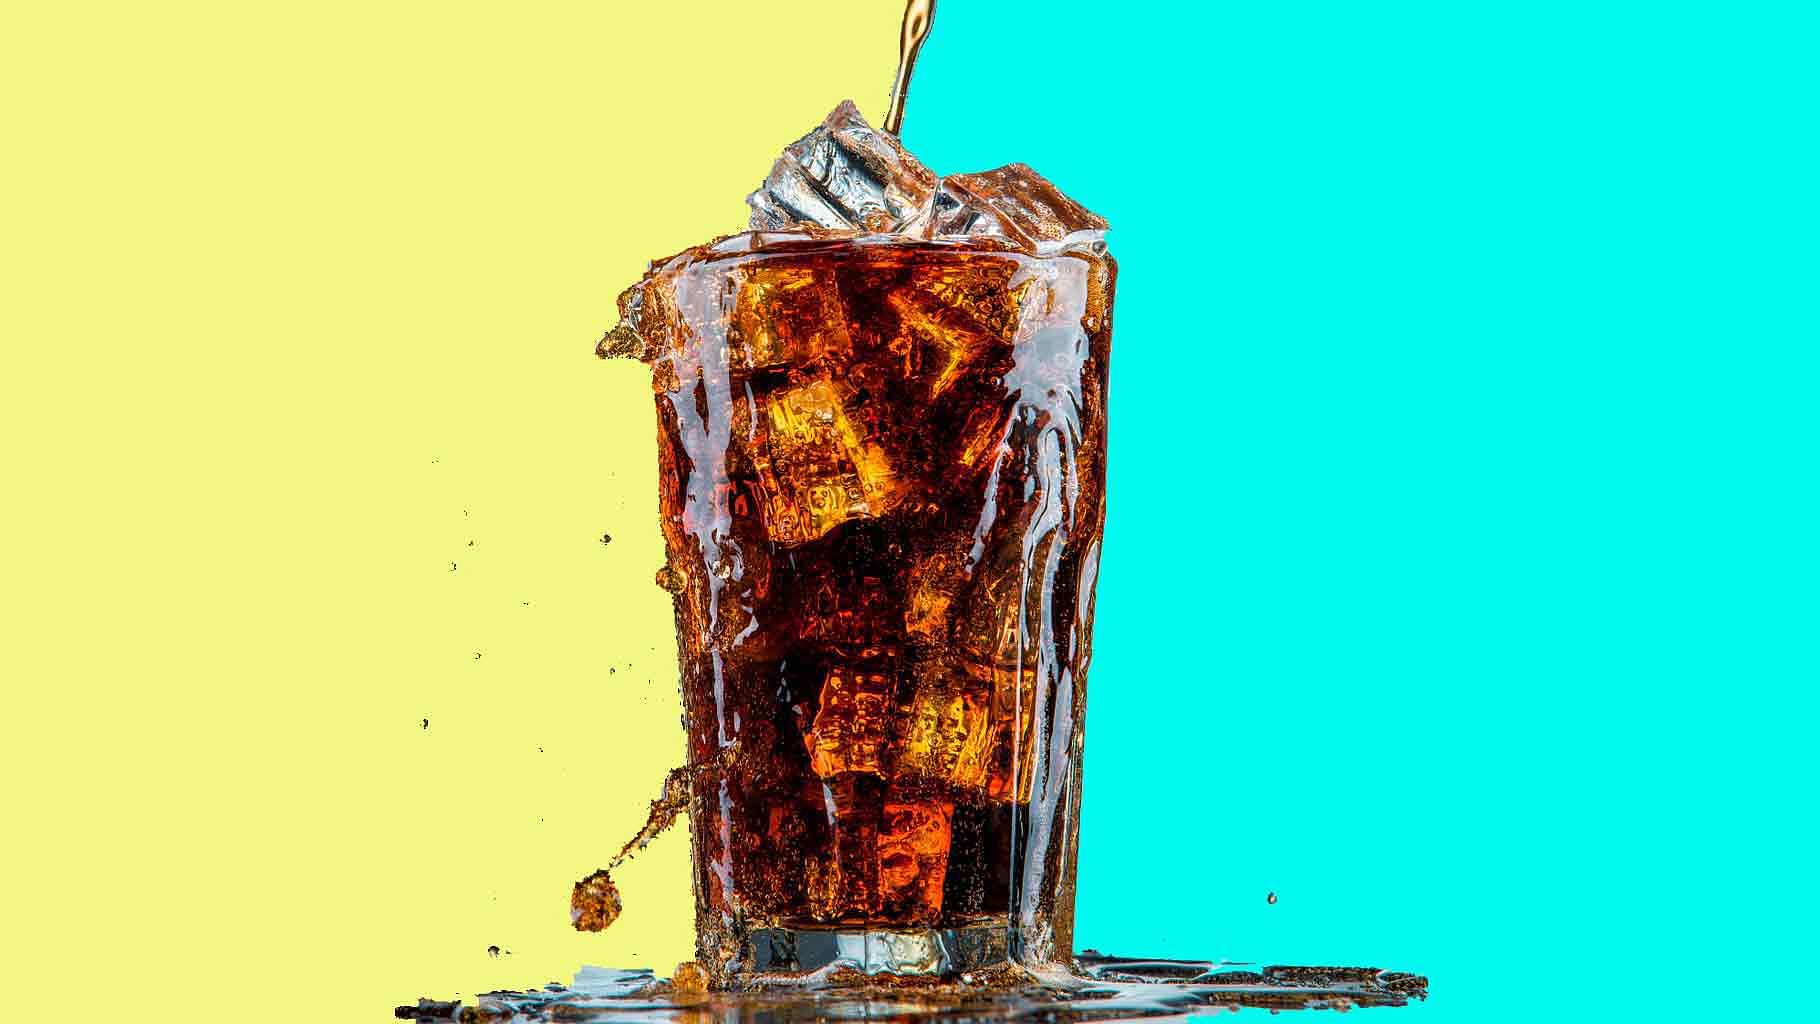 You all know it by heart – too much soda is bad for health. But just how much is too much? 